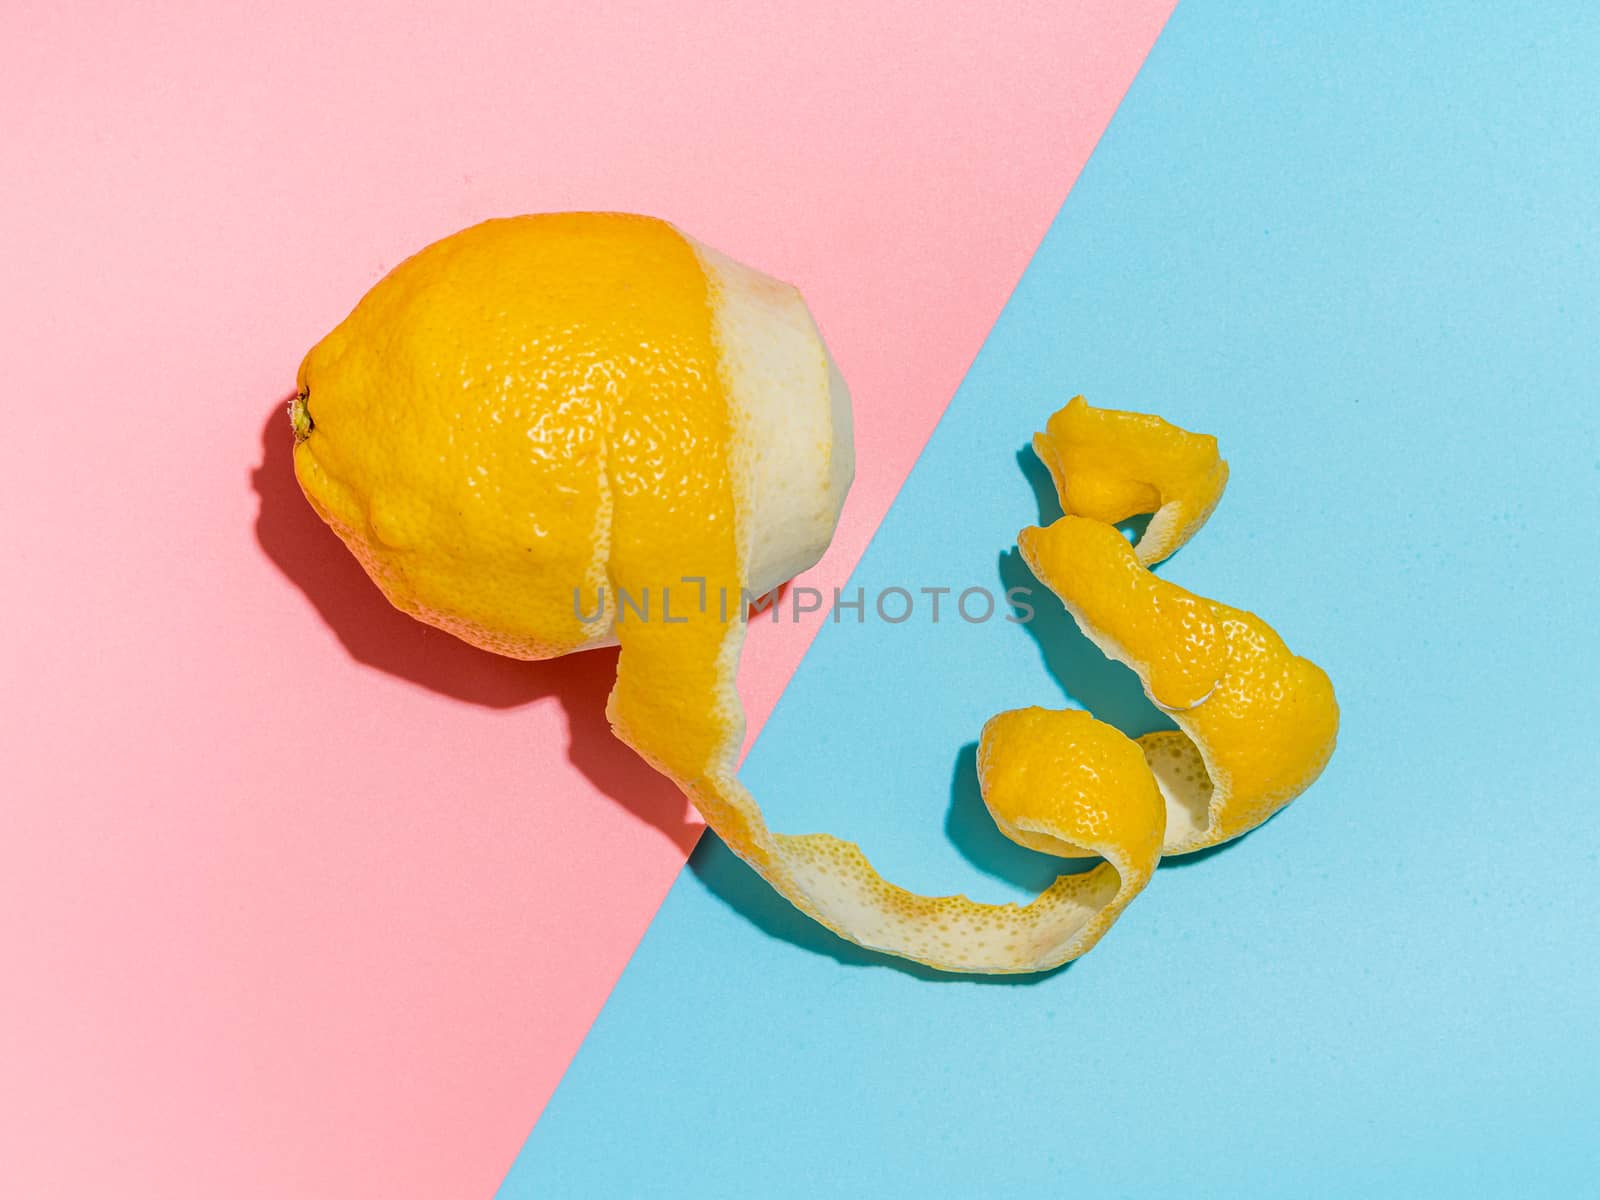 Lemon and peel on bright colorful background by fascinadora